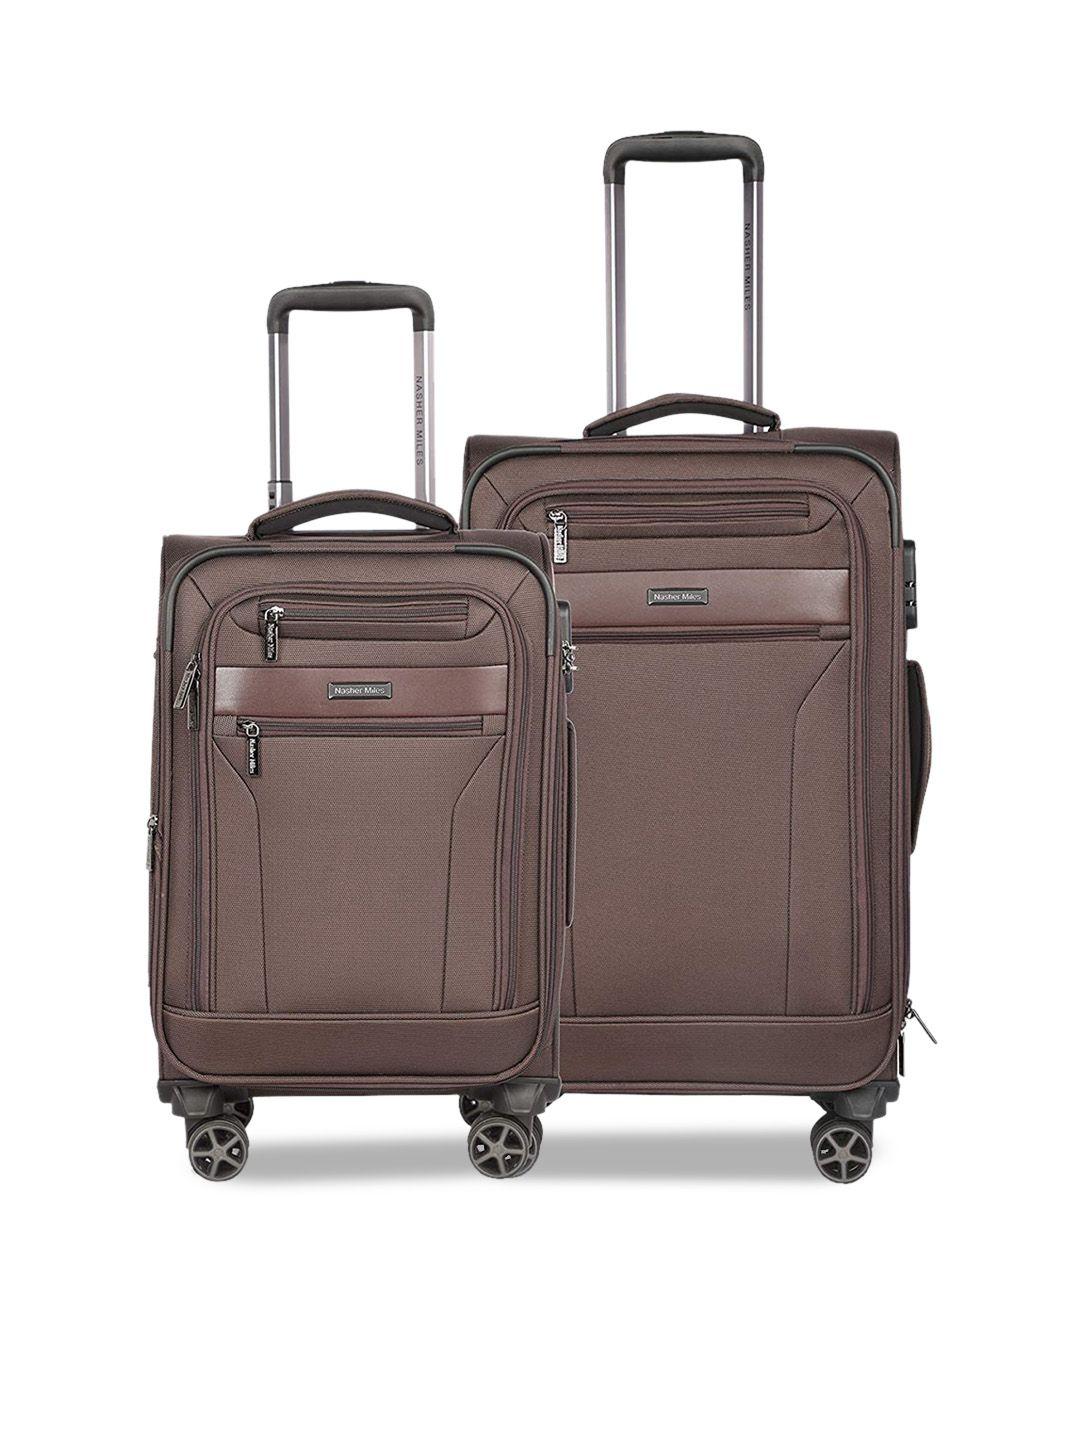 nasher miles set of 2 textured soft-sided trolley suitcase